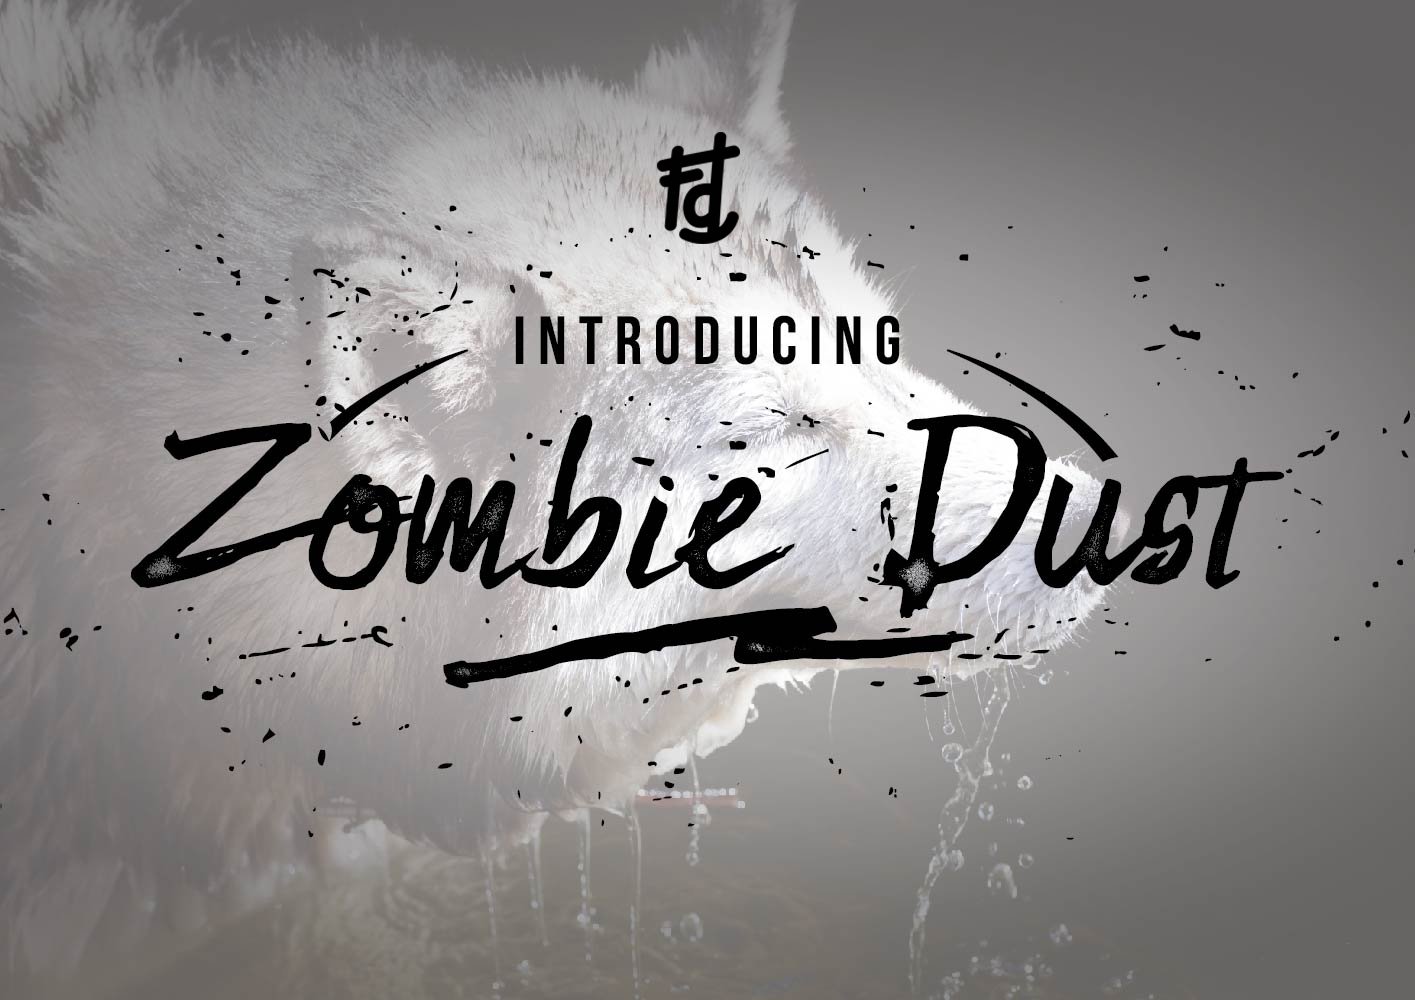 Zombie Dust cover image.